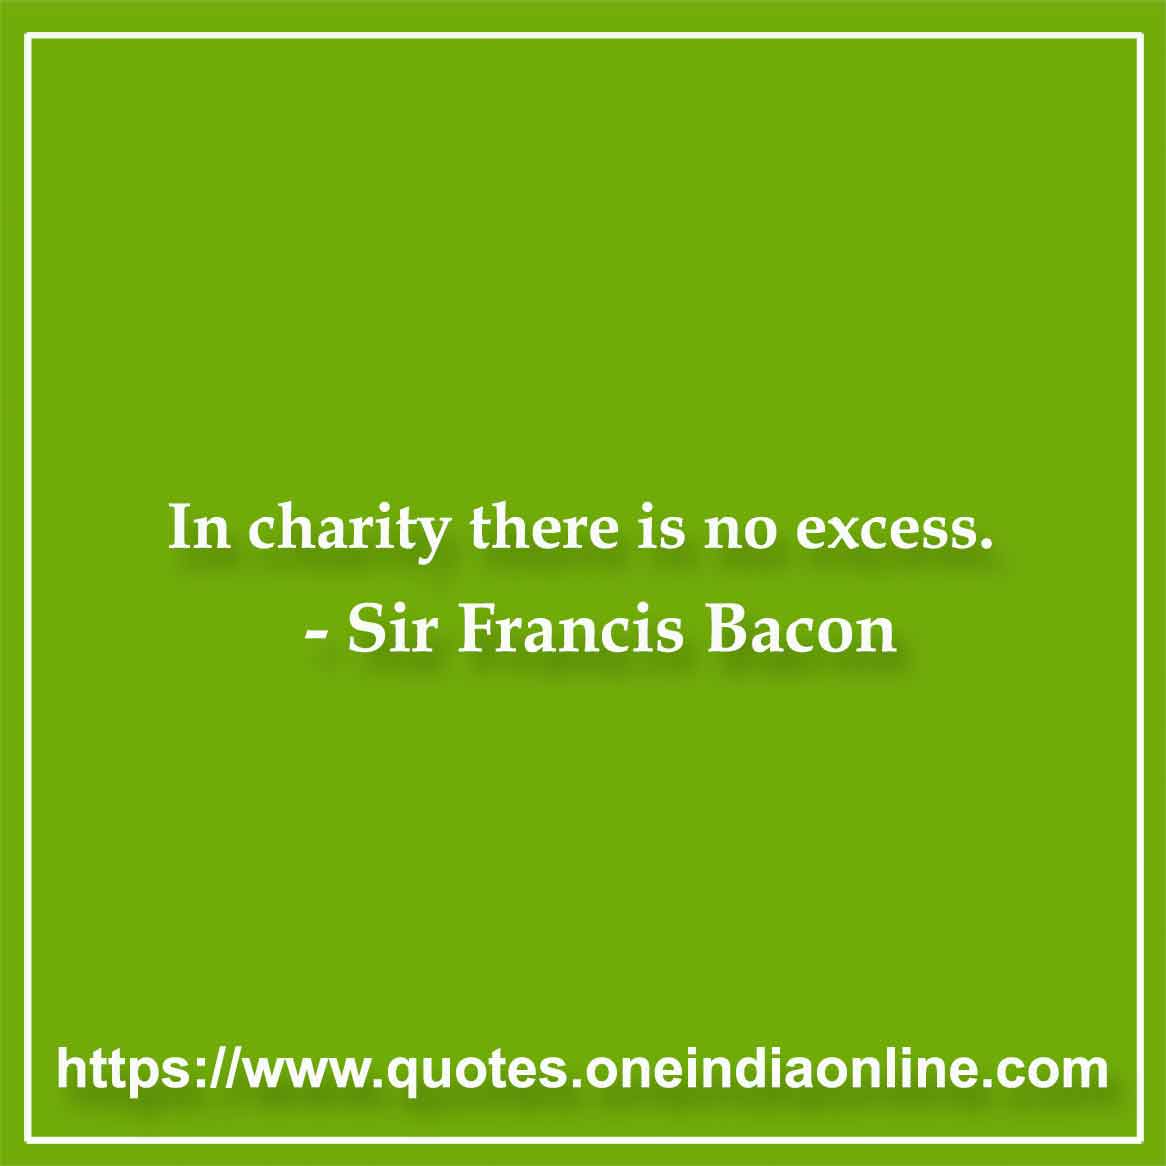 In charity there is no excess.

- Sir Francis Bacon Quotes